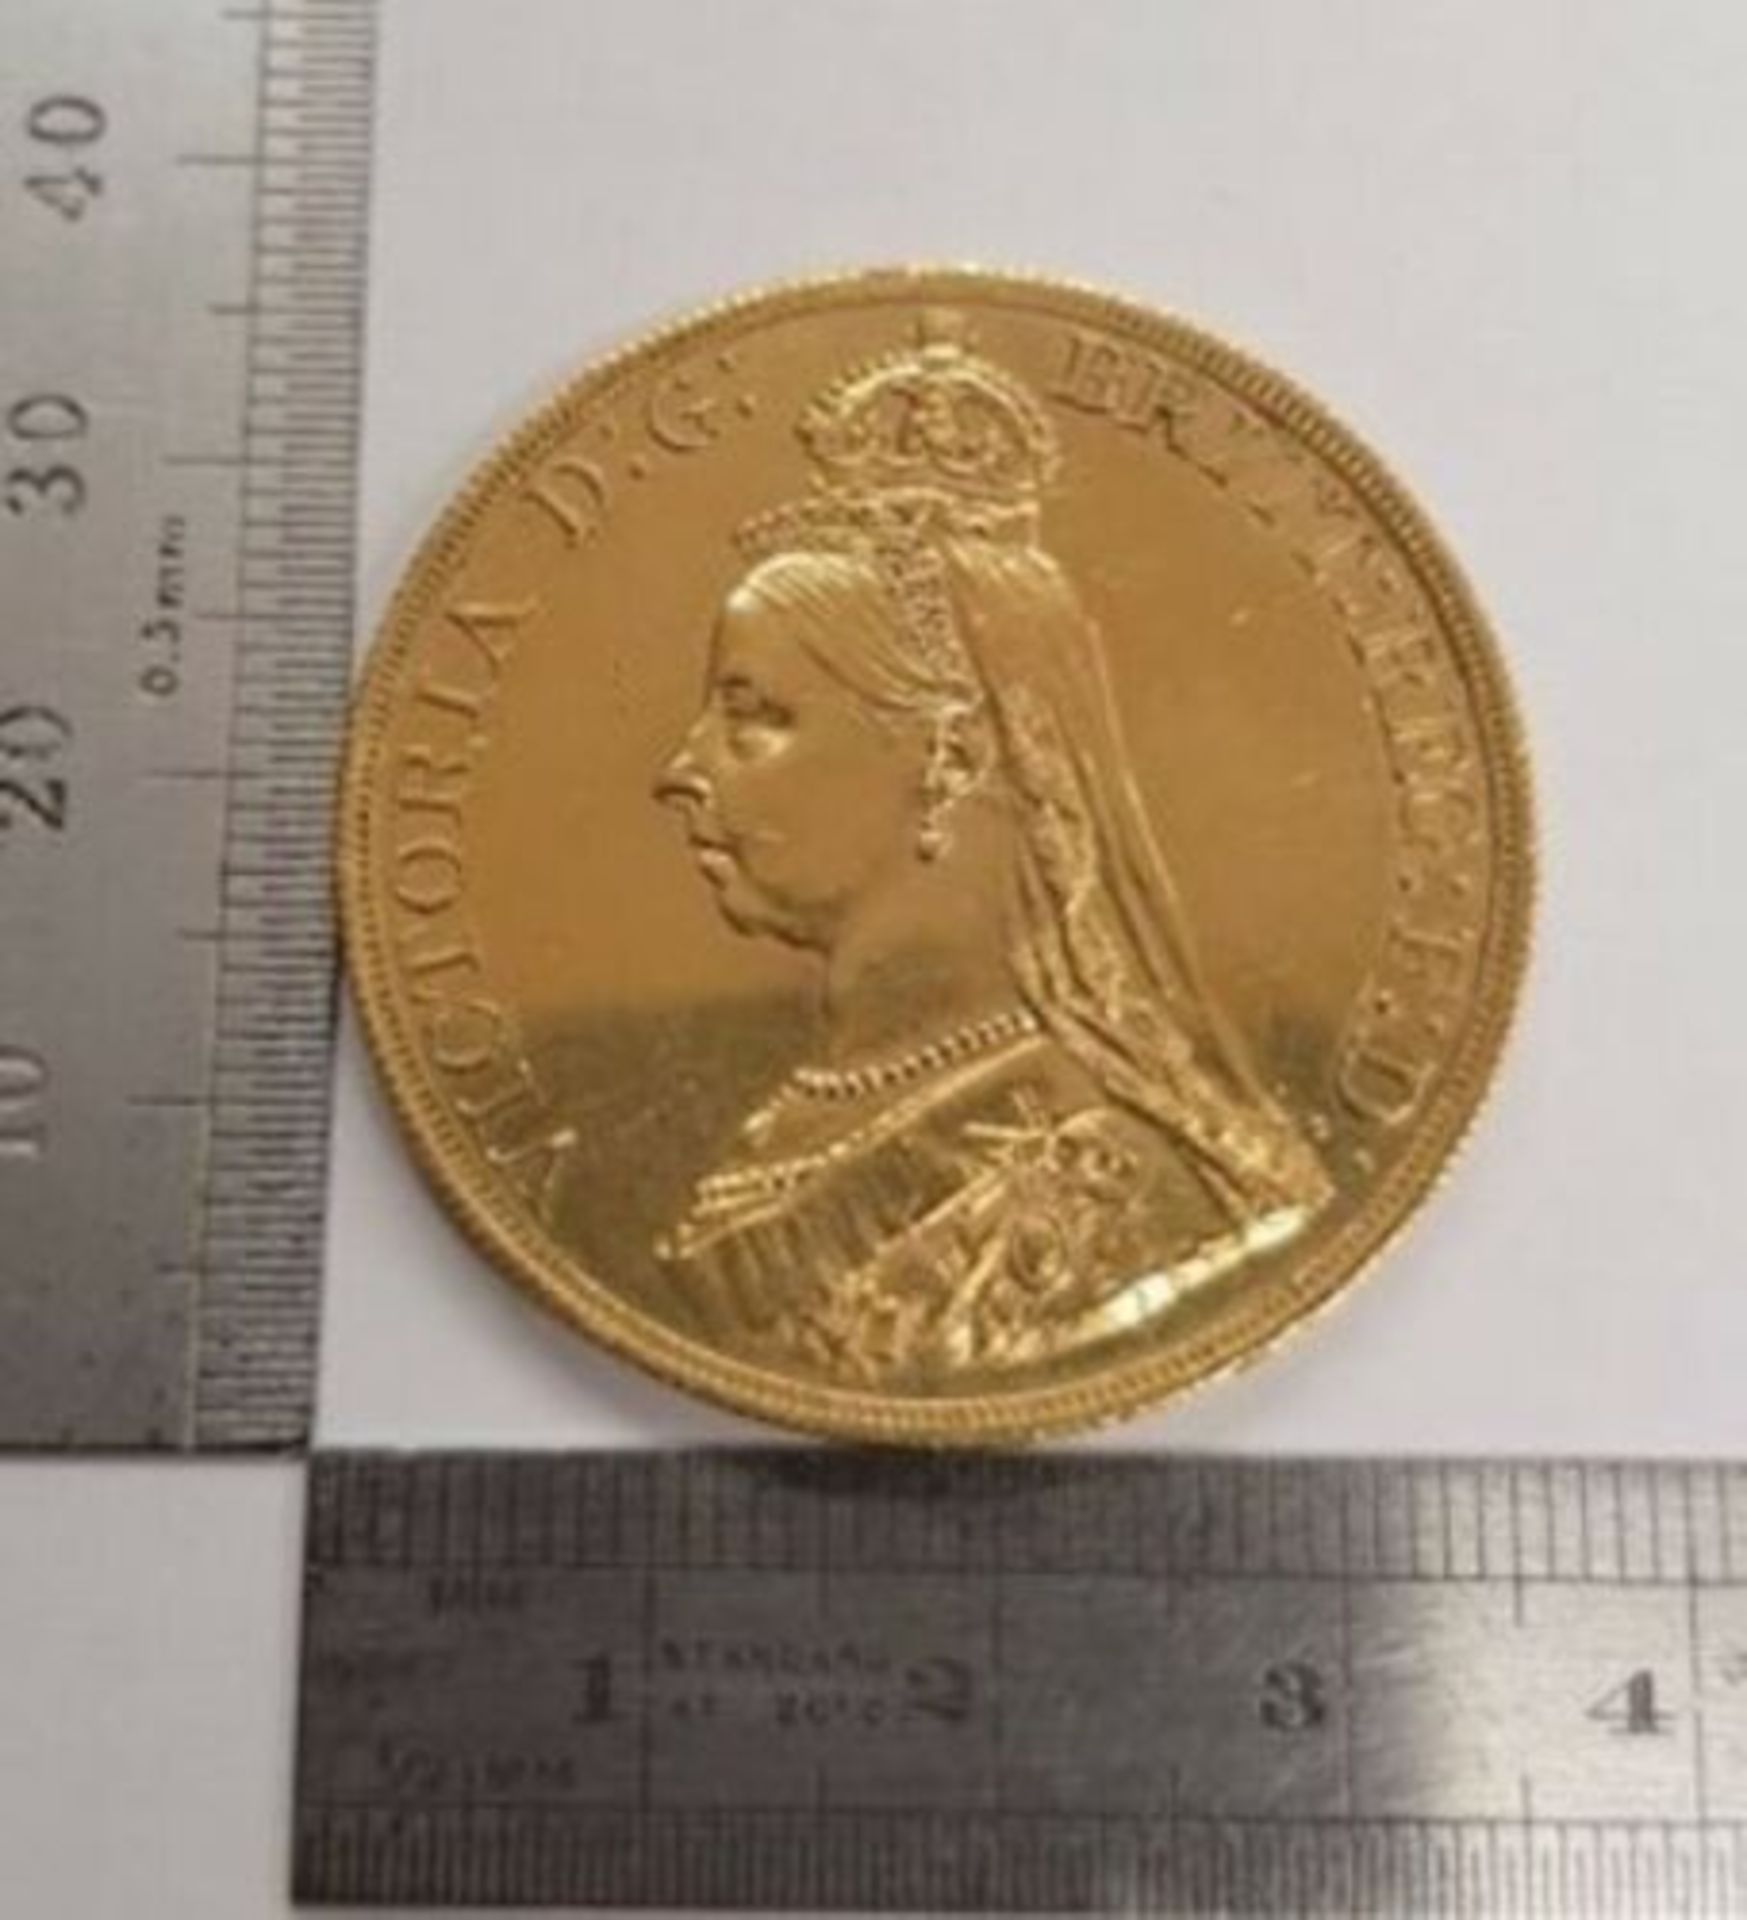 1887 - Victoria Jubilee Gold Five Pound £5 Gold Coin In Removable Mount - Image 2 of 6